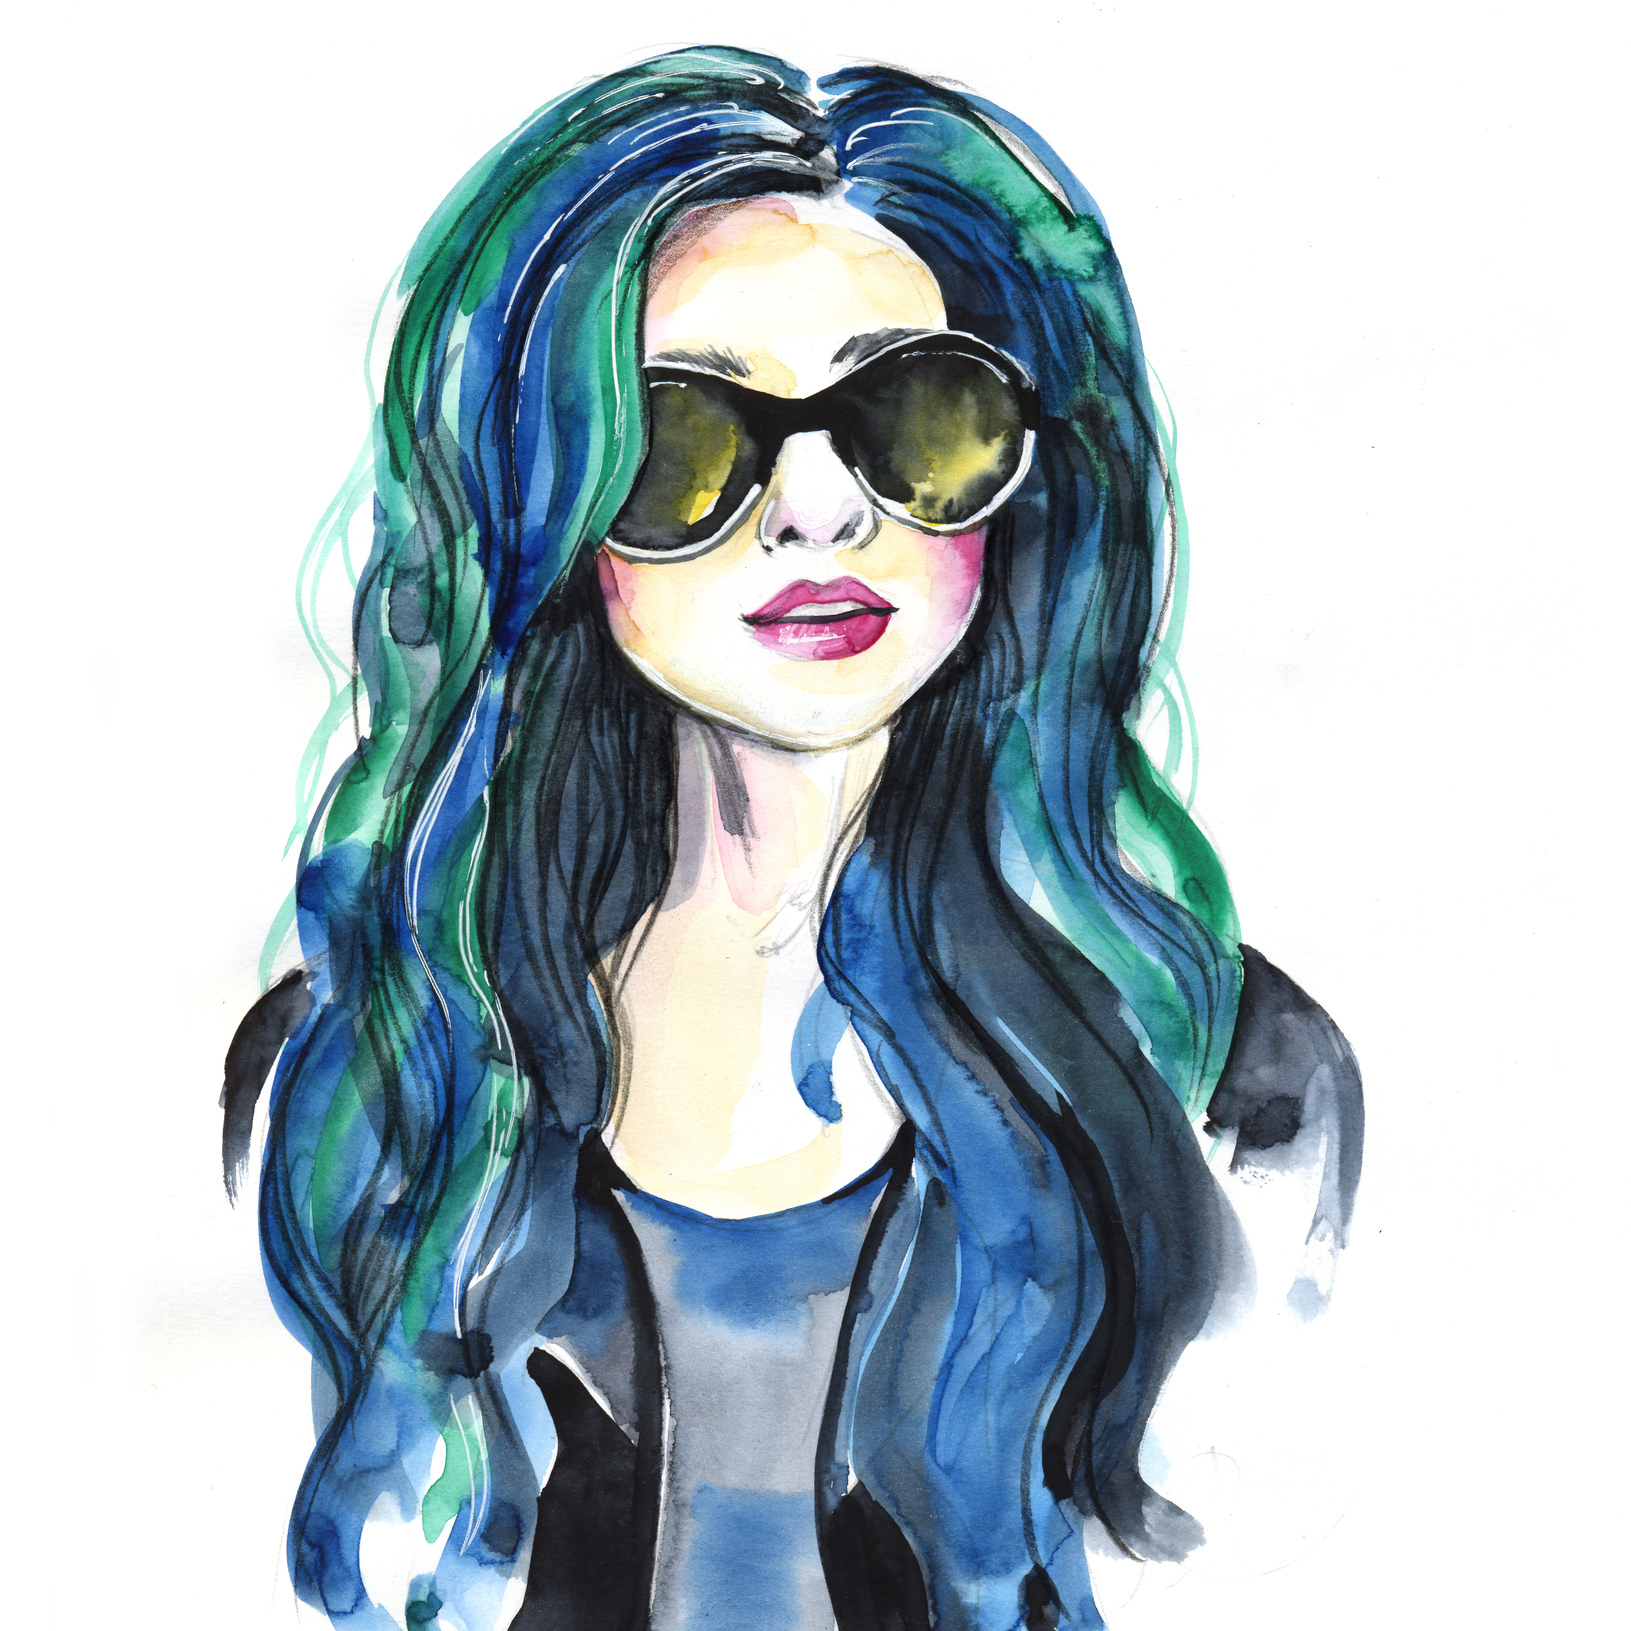 watercolor painting of woman with sunglasses